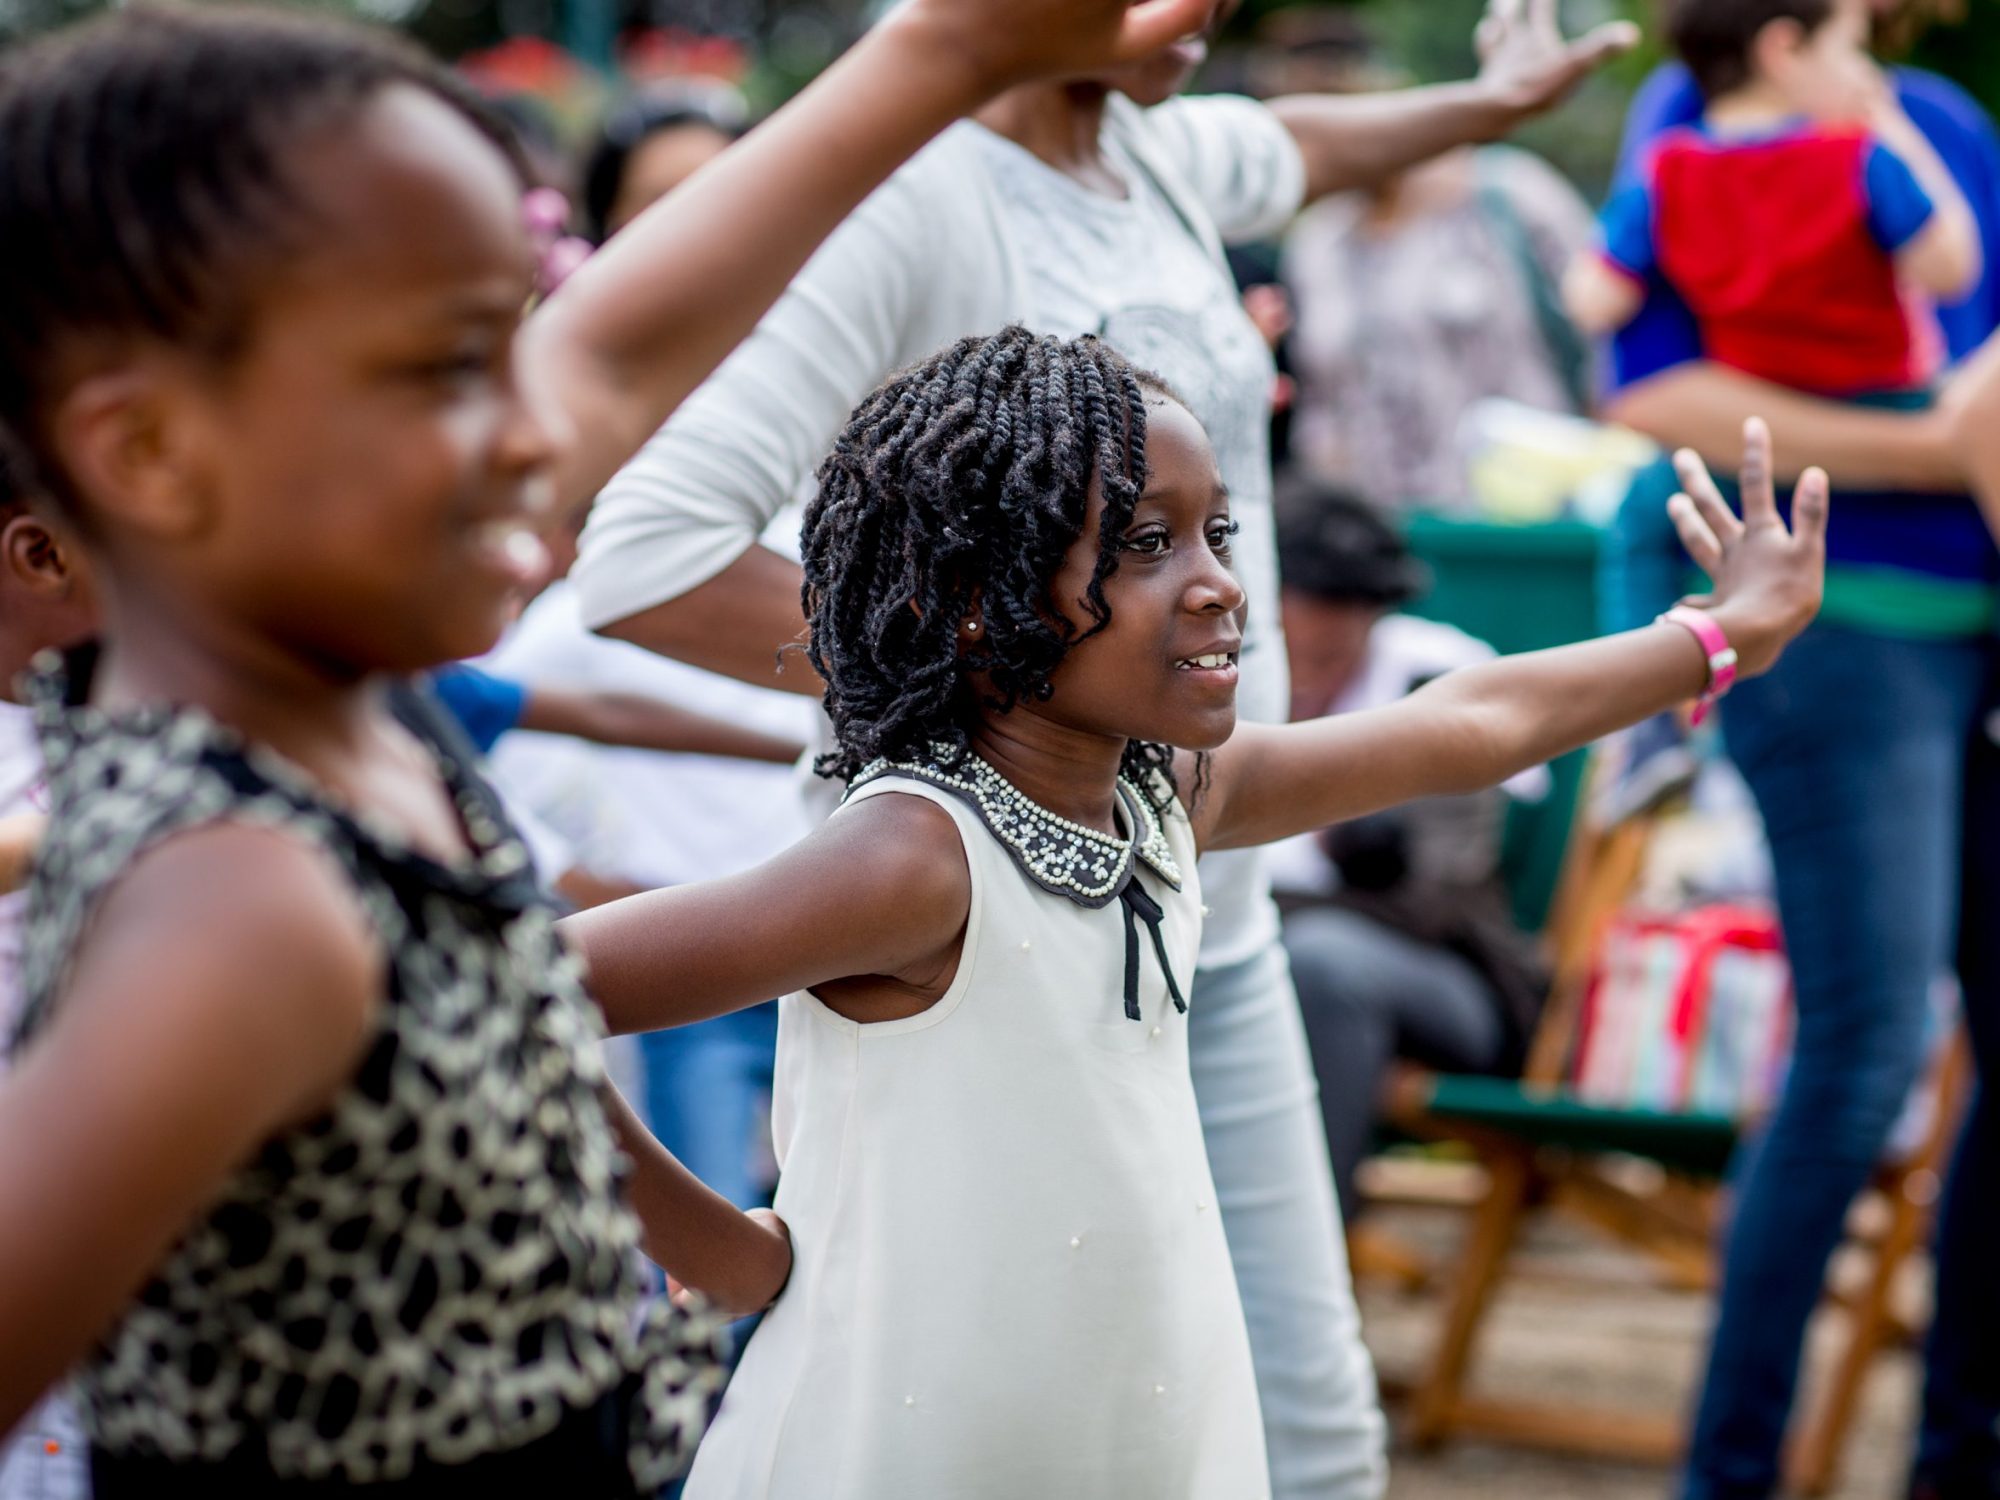 Two girls in close up, in the middle of doing a dance pose, in among other adults and children dancing - they are smiling and their arms are in the air